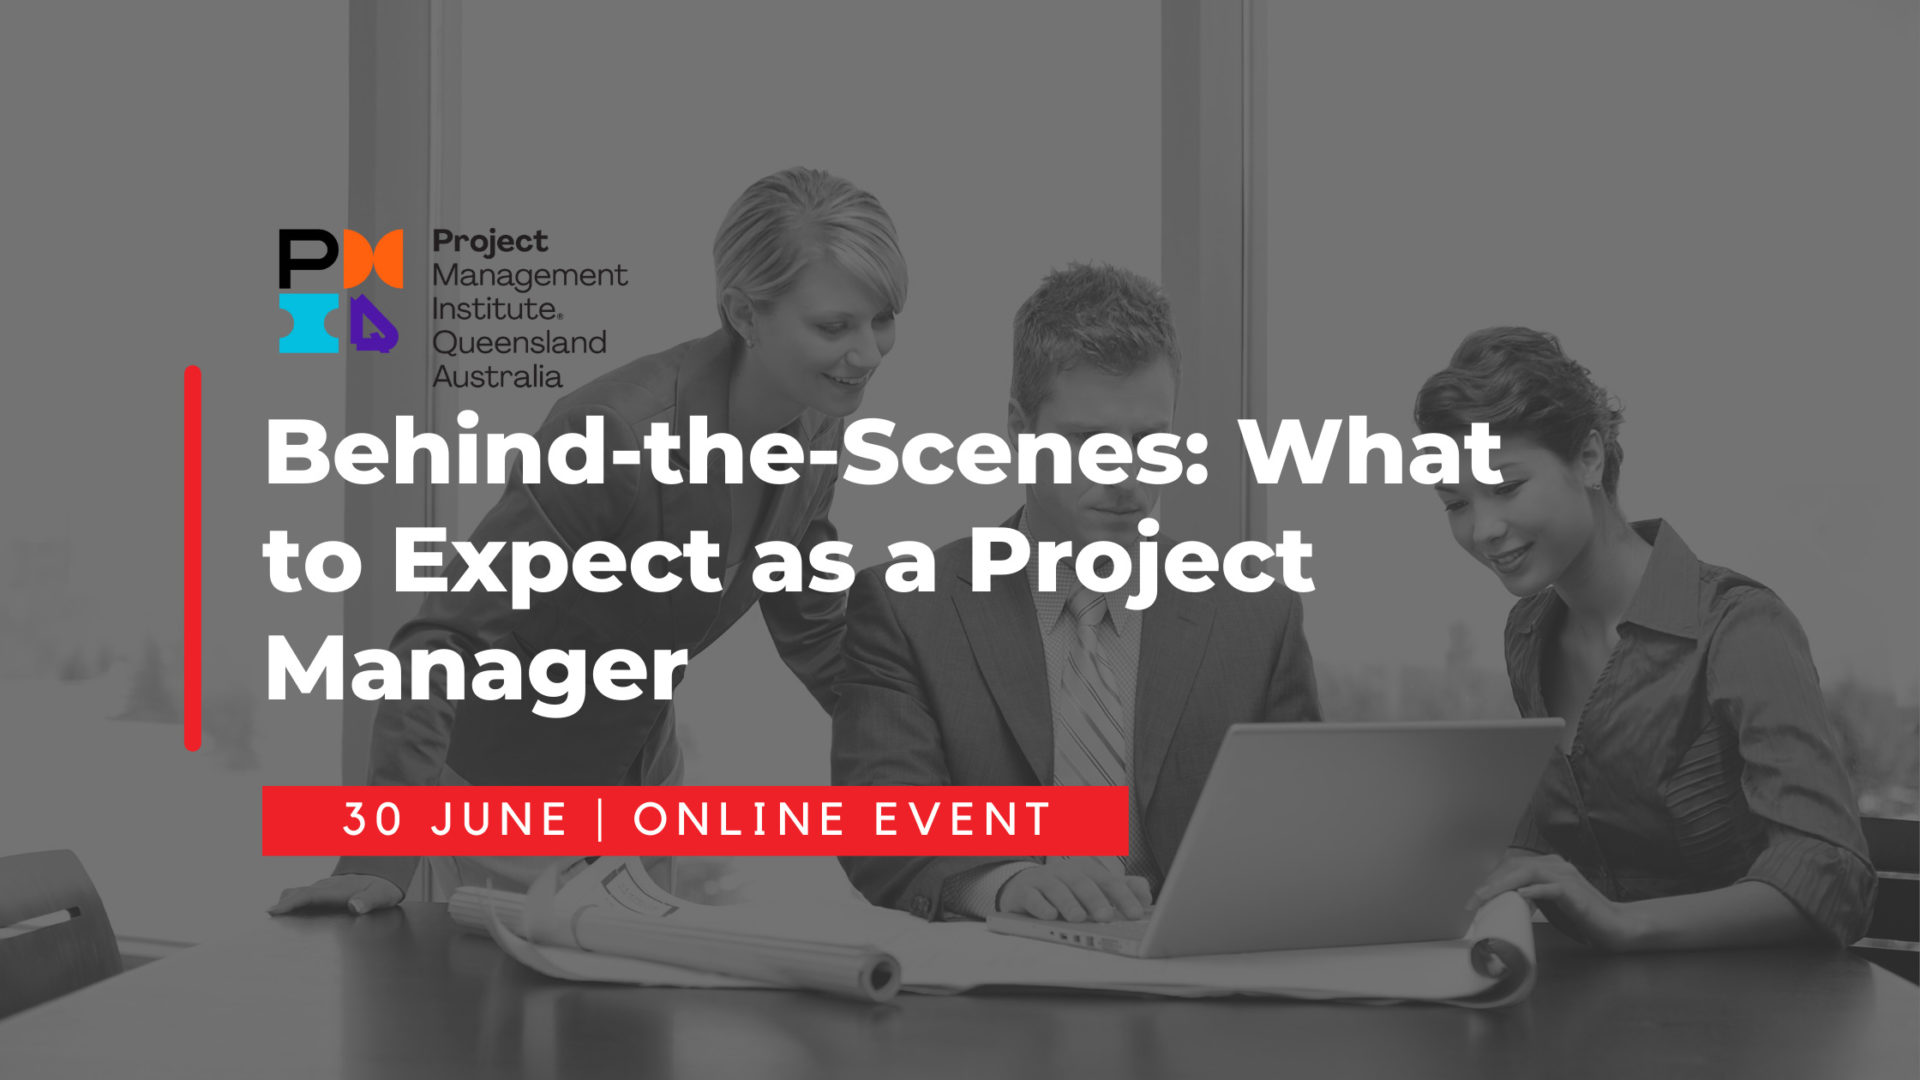 Behind-the-Scenes: What to Expect as a Project Manager (Online Event)